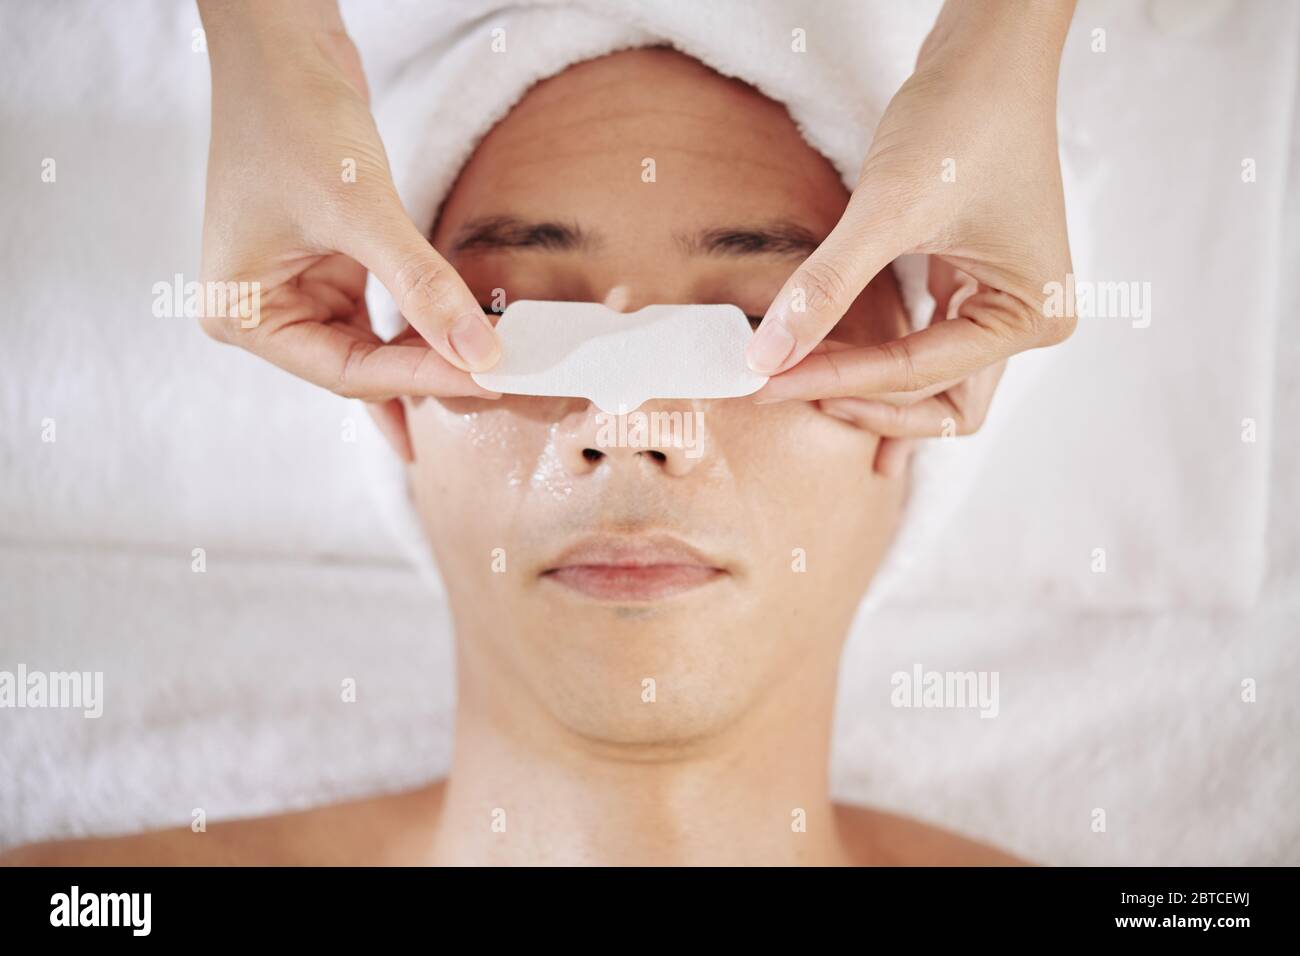 Cosmetologist applying nose strip on nose of young man to clear pores Stock Photo